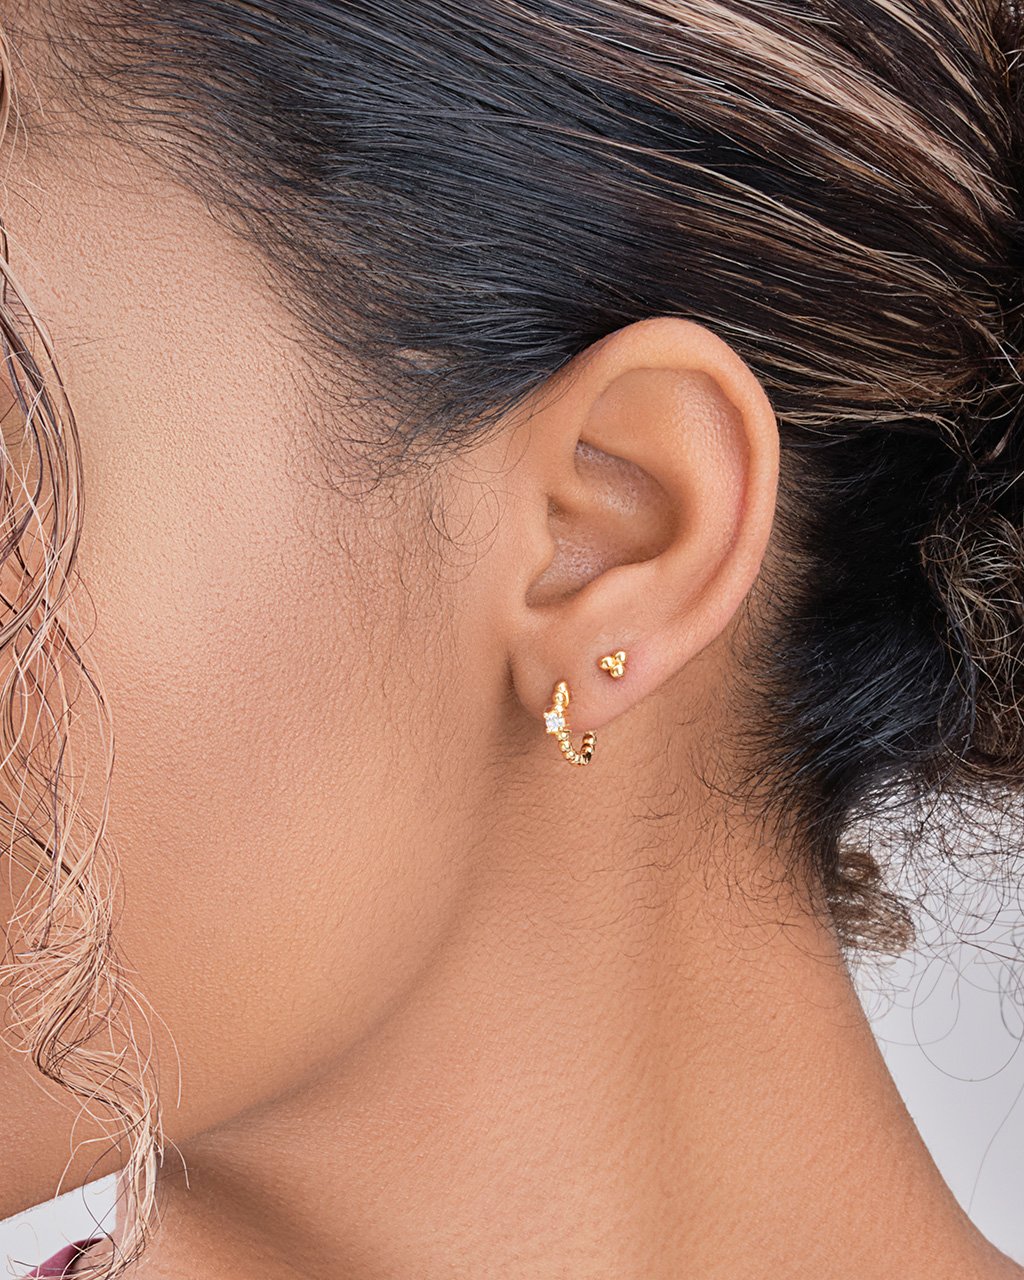 Amazon.com: Small Gold Huggie Hoop Earring Set for Cartilage Helix Tragus  Nose Ring Hoop, Tiny 14K Yellow Gold Filled Mini Gold Hoops - 6mm 7mm 8mm :  Handmade Products